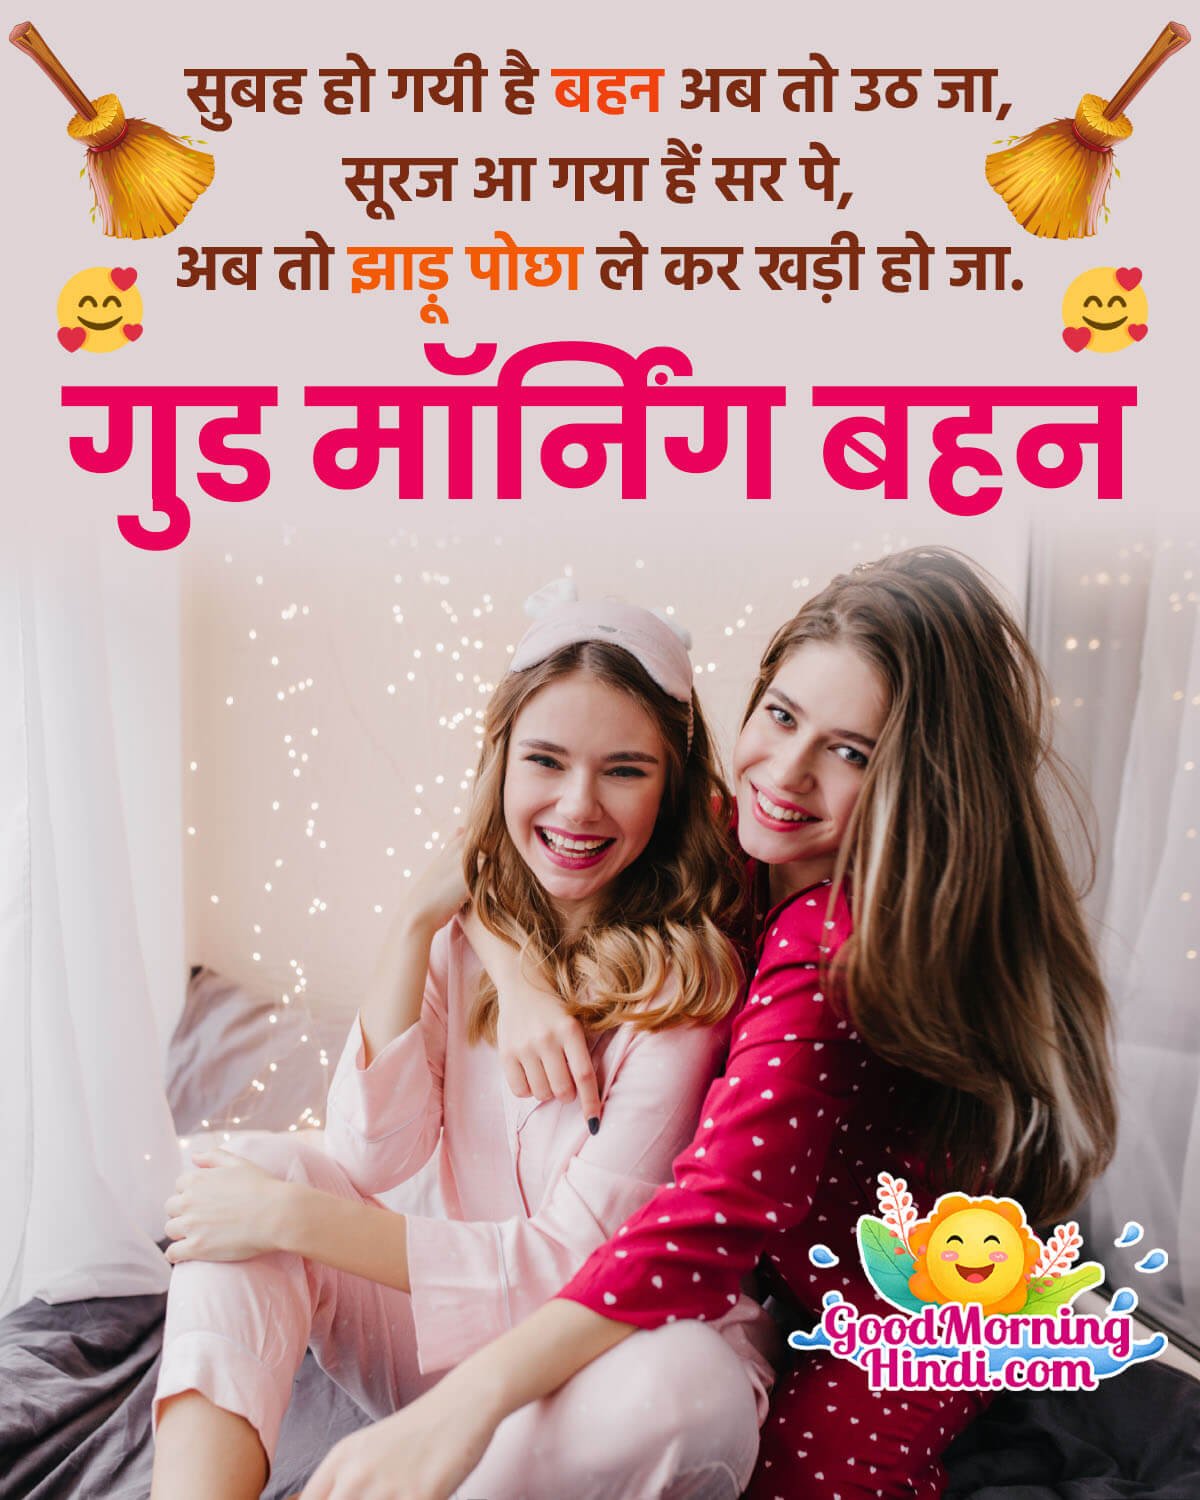 Good Morning Messages For Sister In Hindi